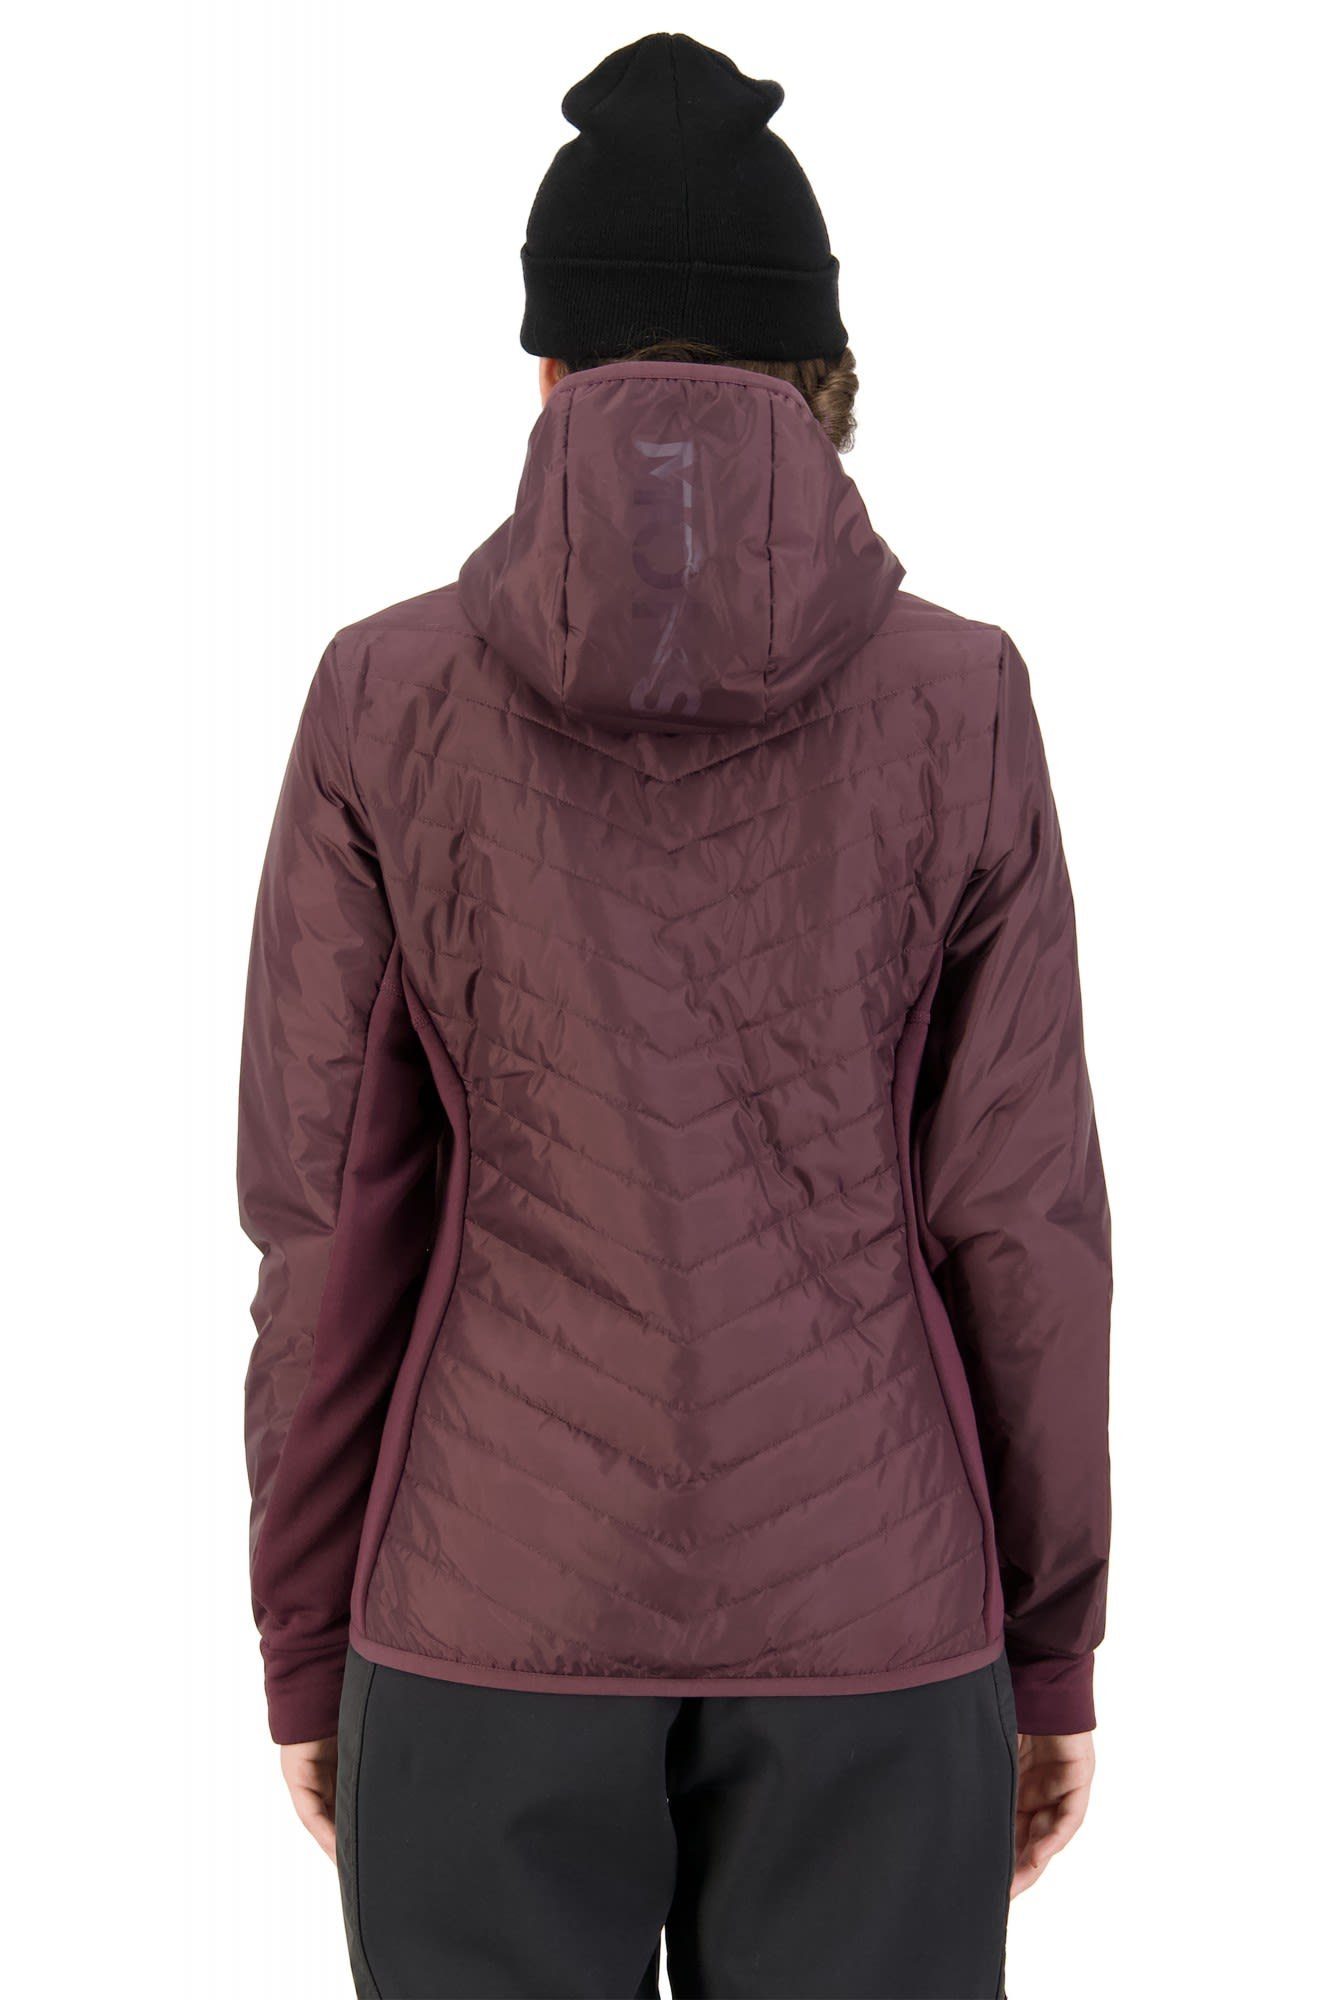 Hood Royale Neve W The Wild Wool Into Damen Mons Mons Anorak Insulation Royale